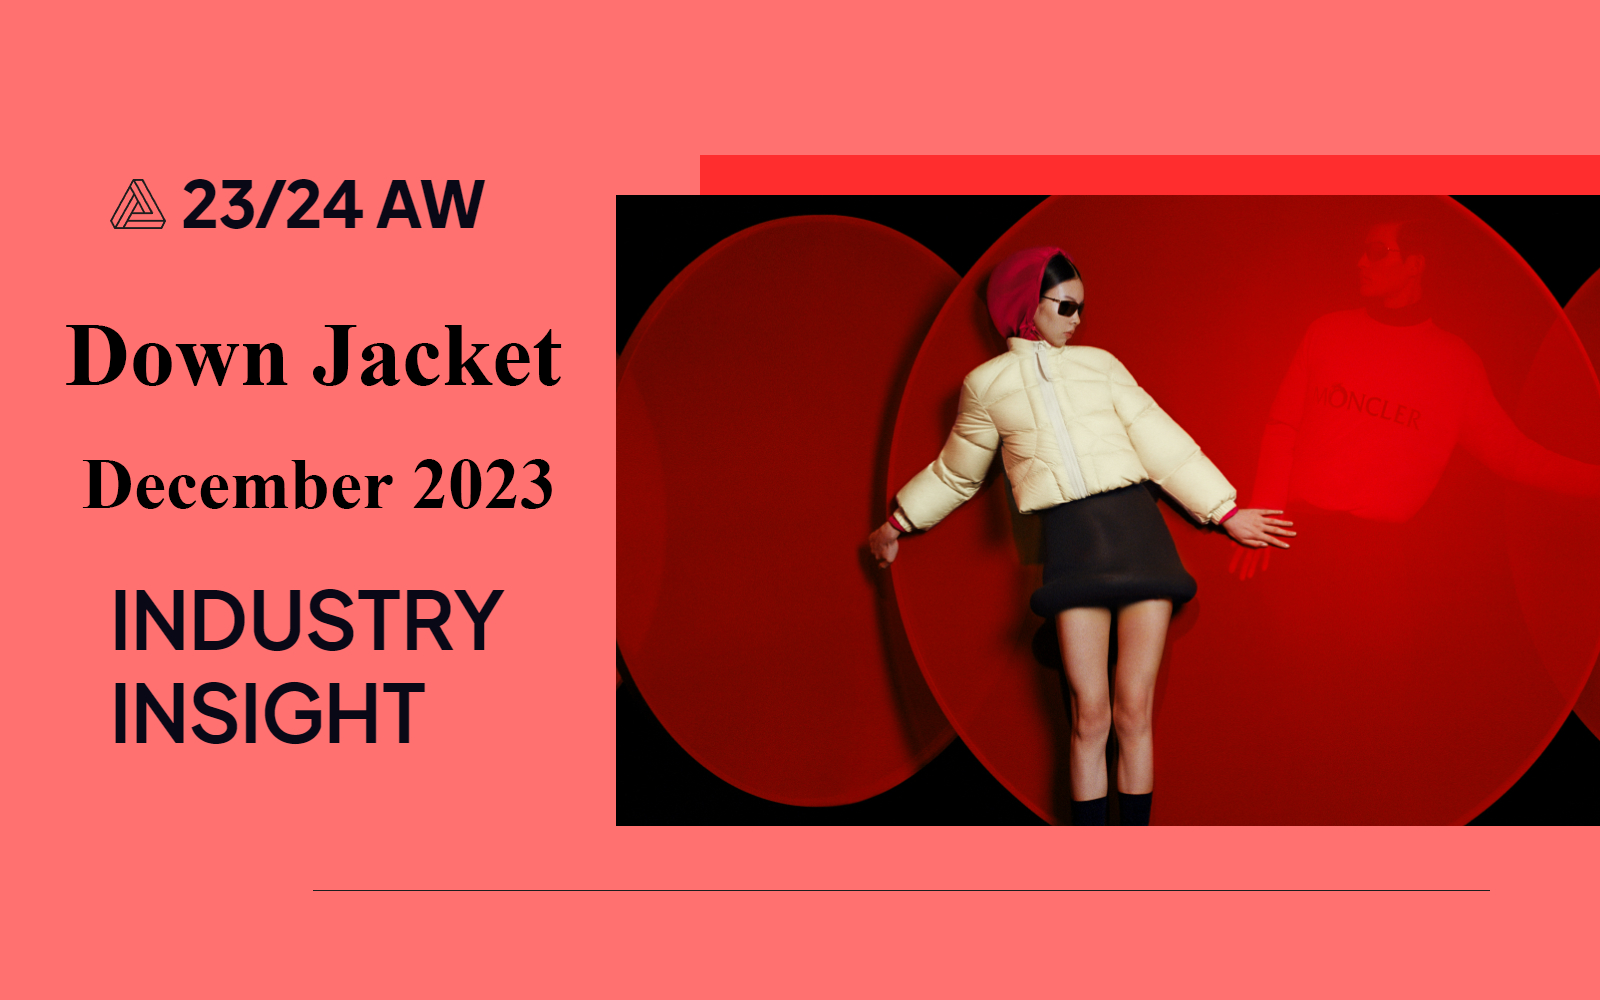 December 2023 -- The Industry Insight of Down Jacket